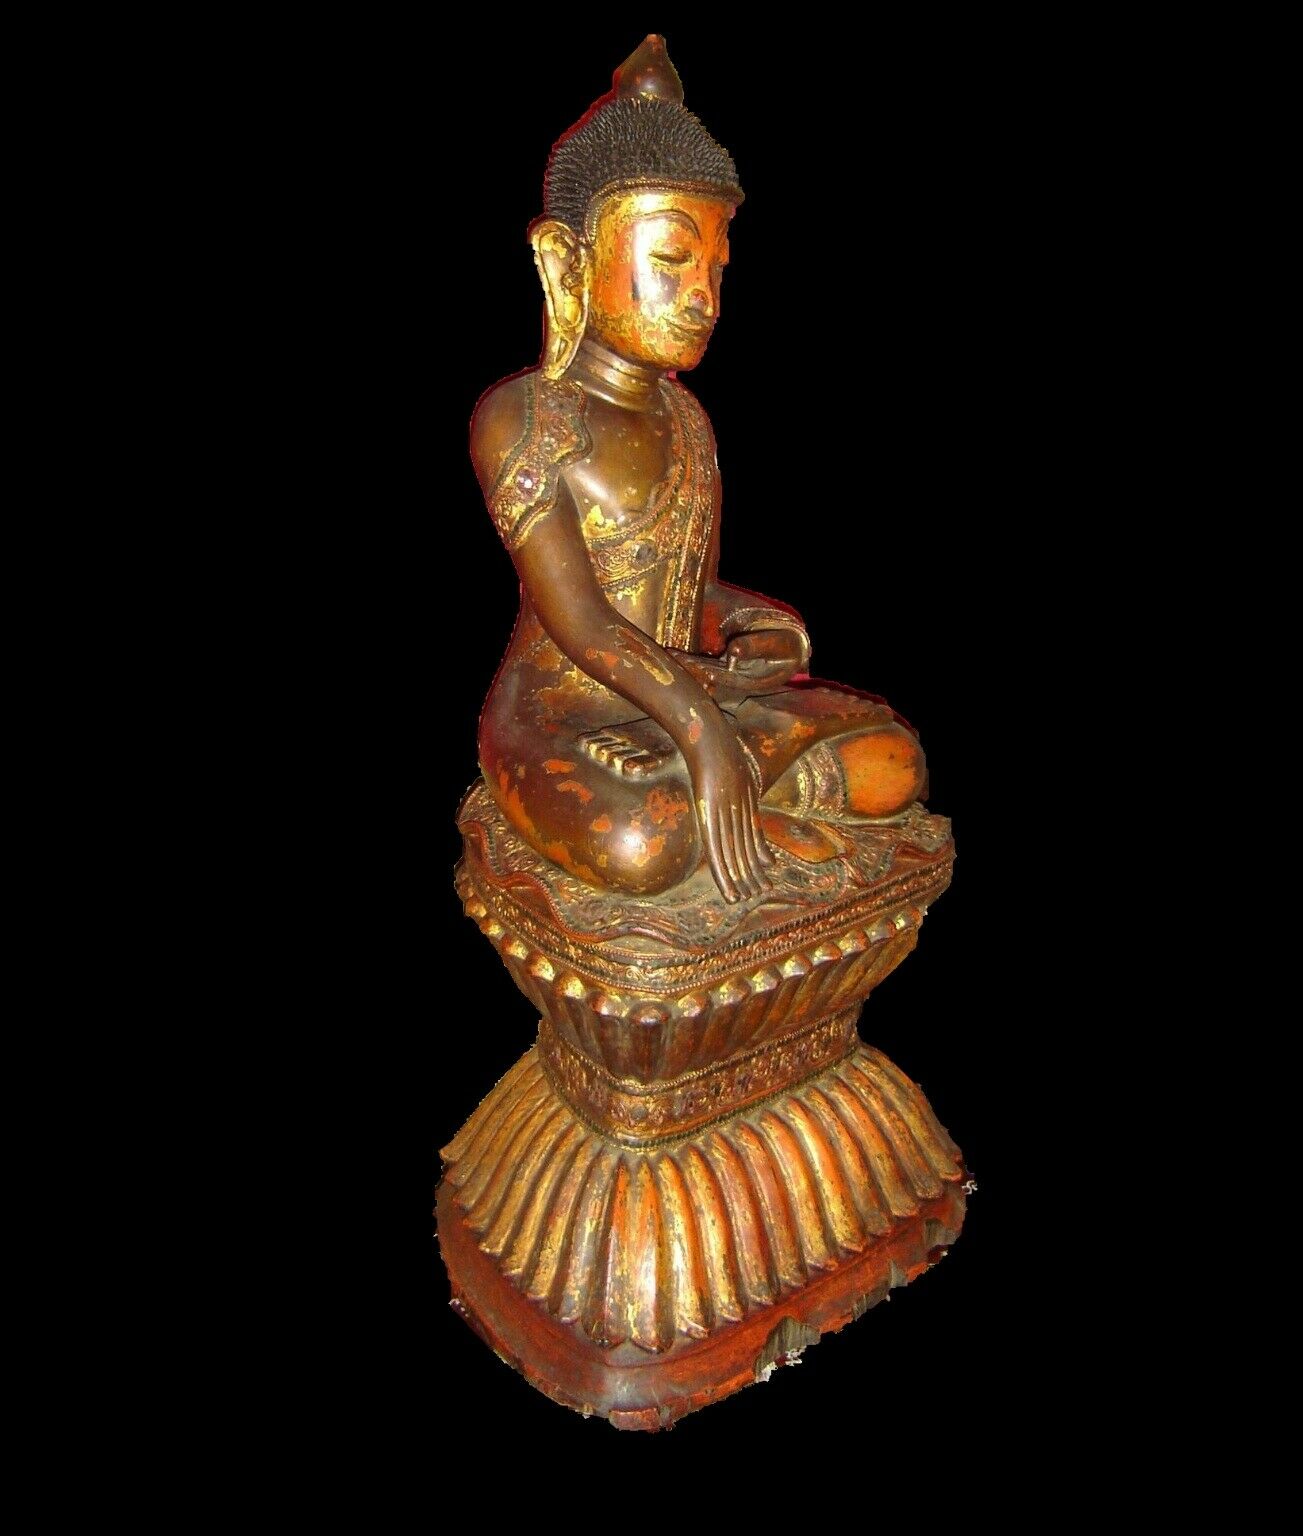 Antique Huge Burma Or Hindu Ava Shan Buddha Statue Carved Gilded Wood And Glass.